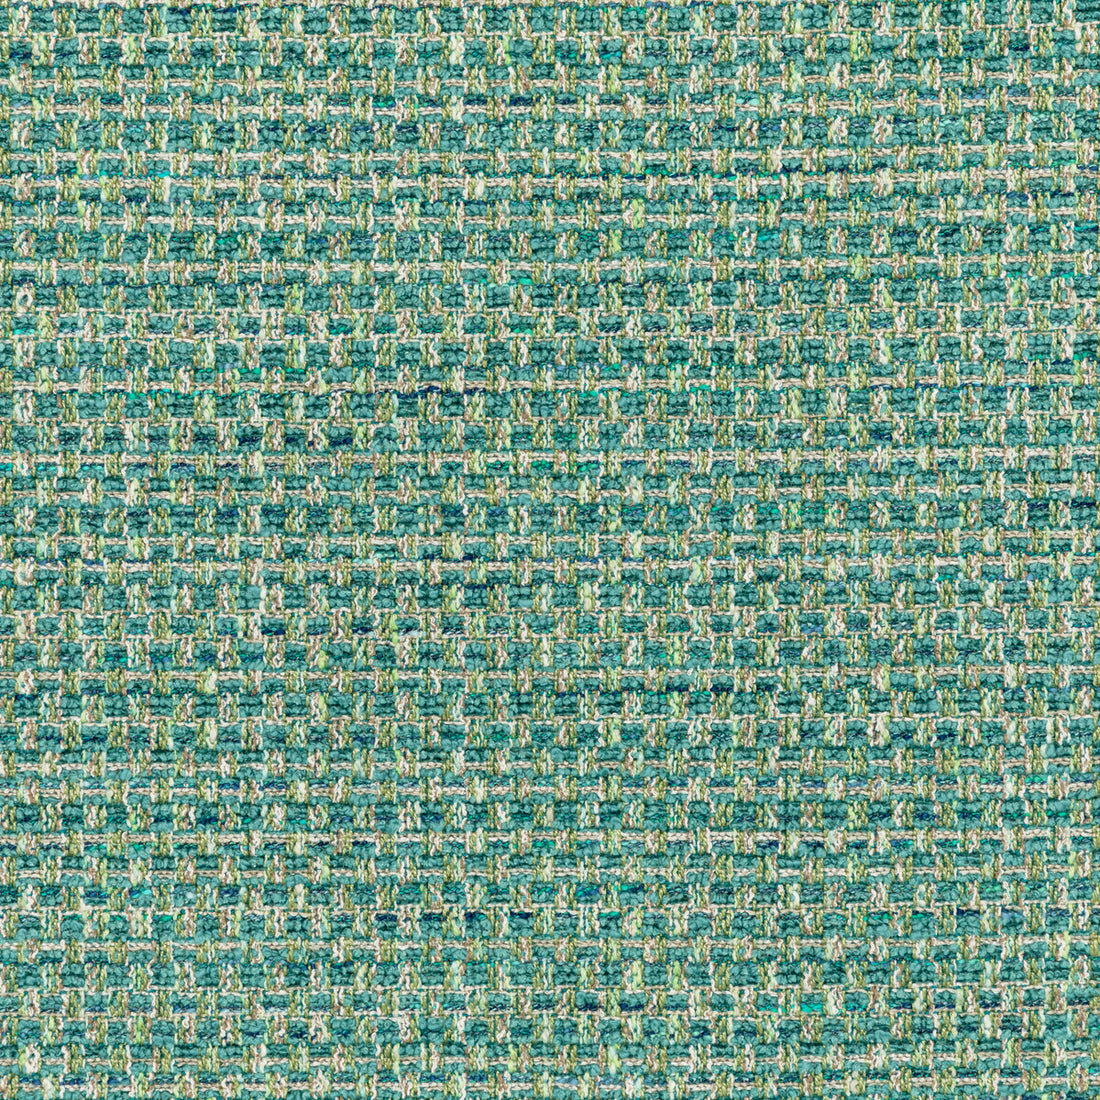 Rue Cambon fabric in peacock color - pattern 36102.353.0 - by Kravet Couture in the Luxury Textures II collection